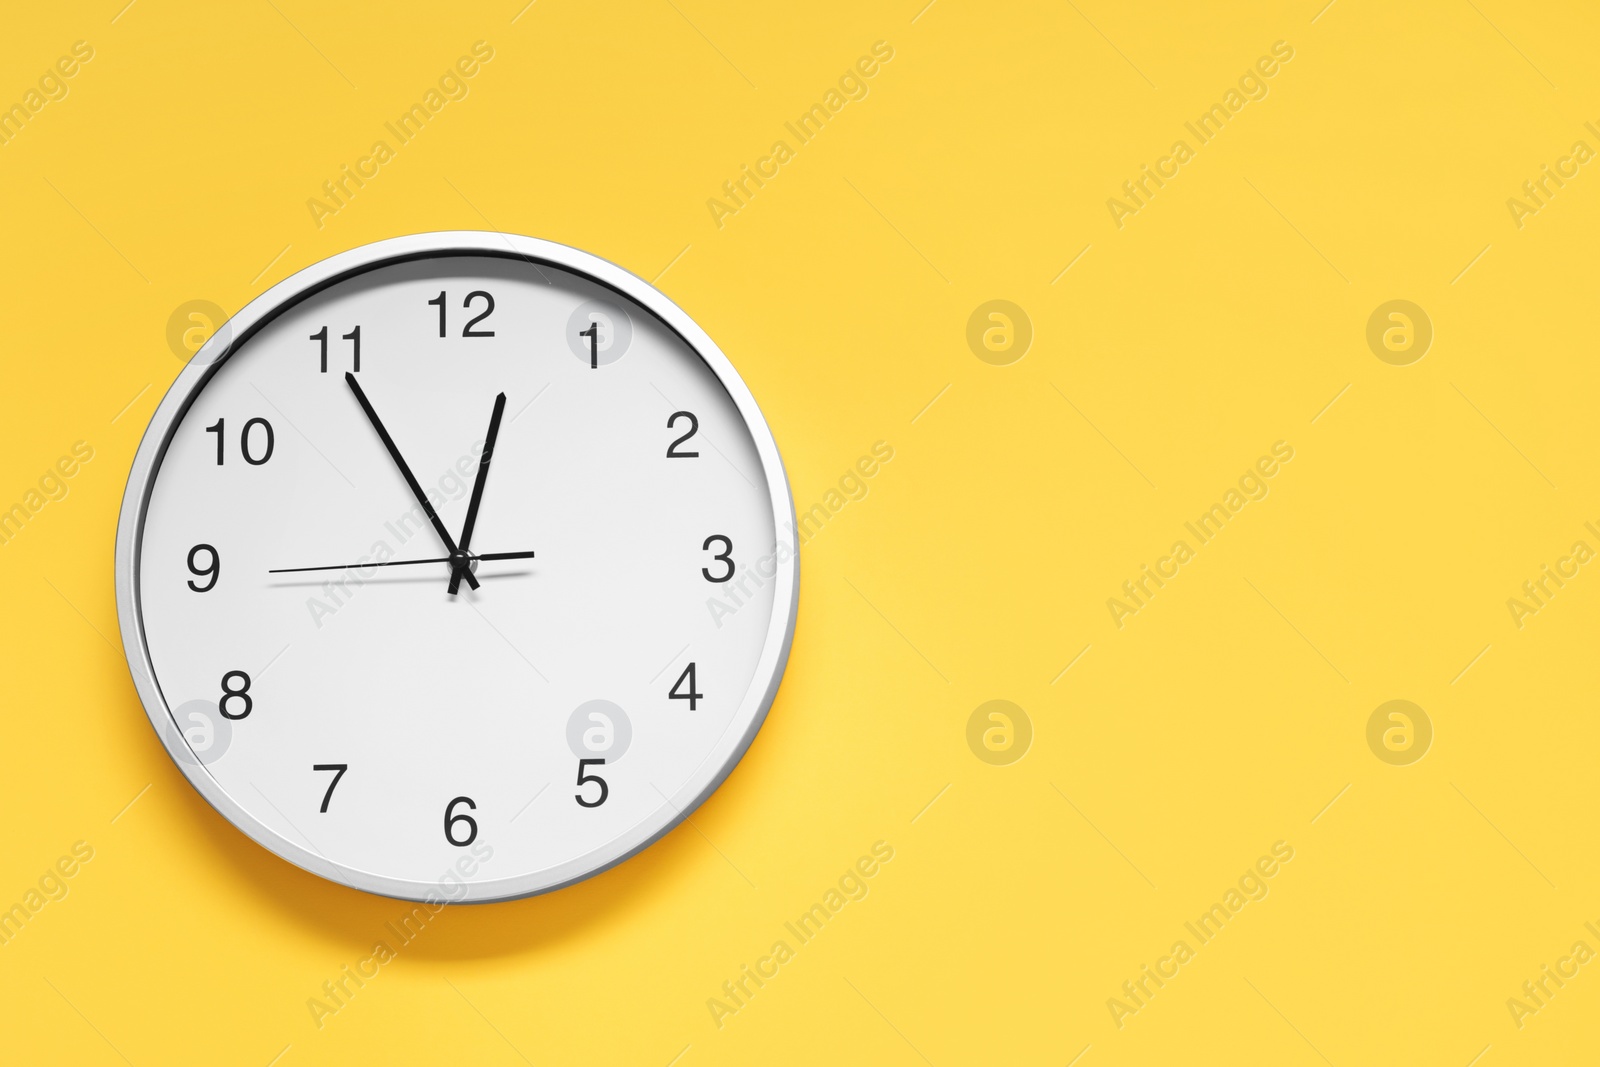 Photo of Stylish round clock on yellow background, top view with space for text. Interior element